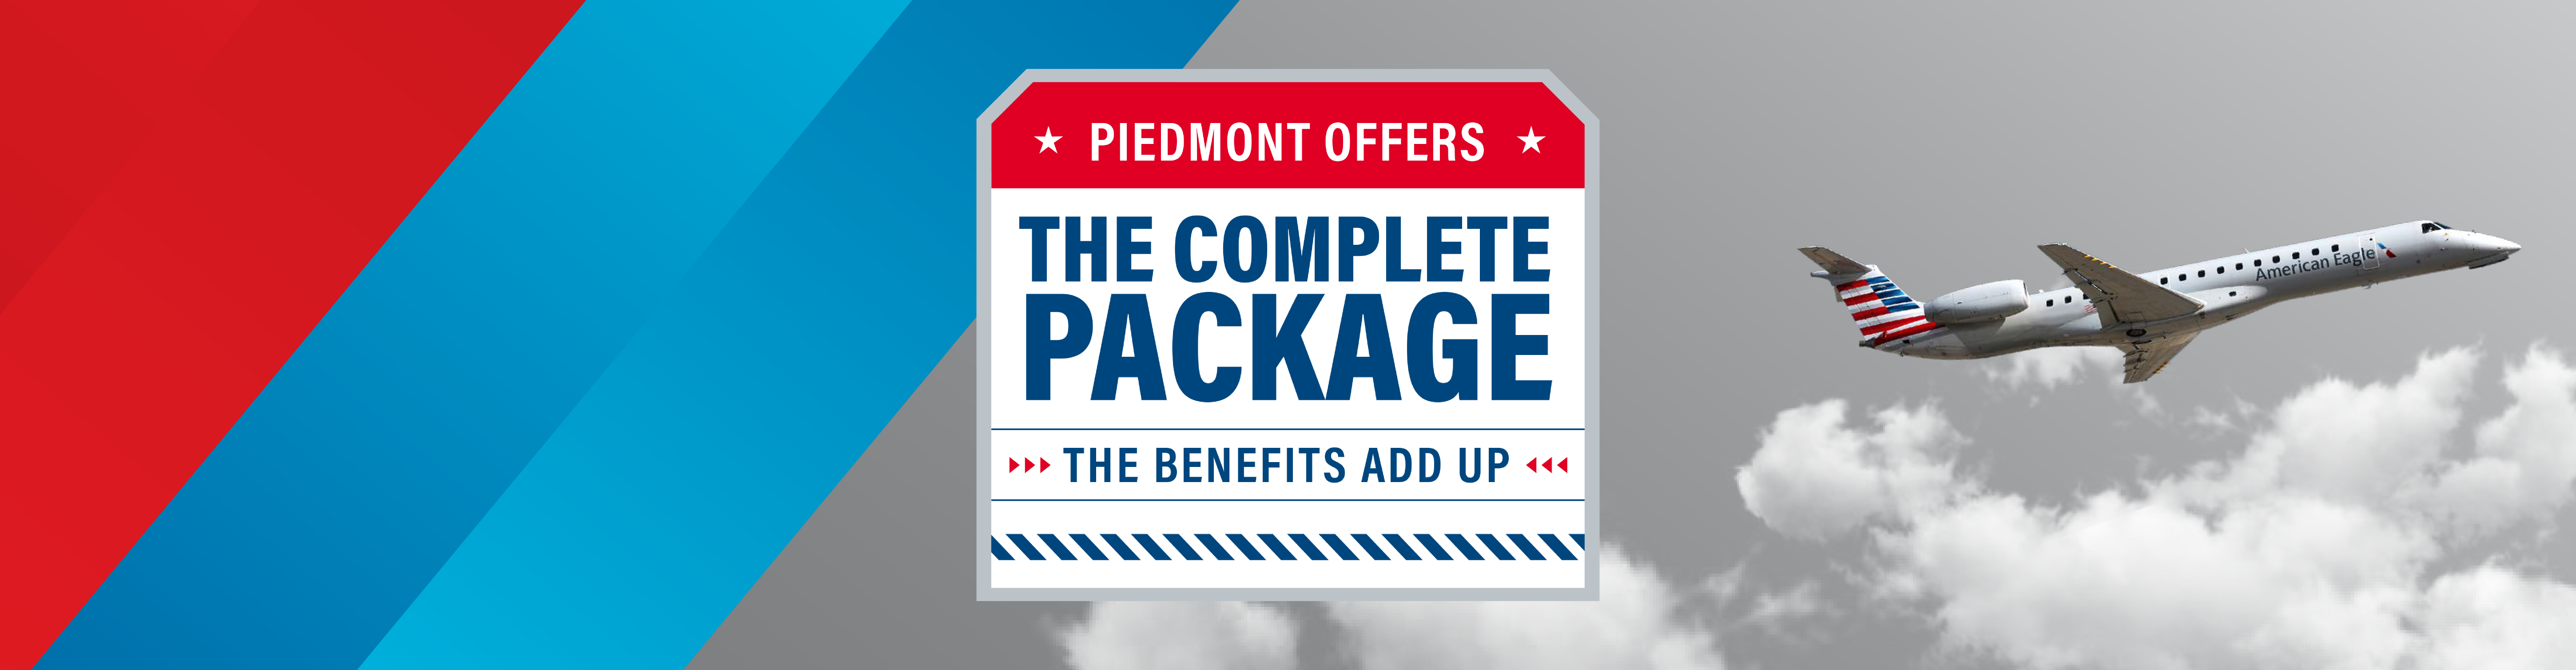 piedmont offers the complete package